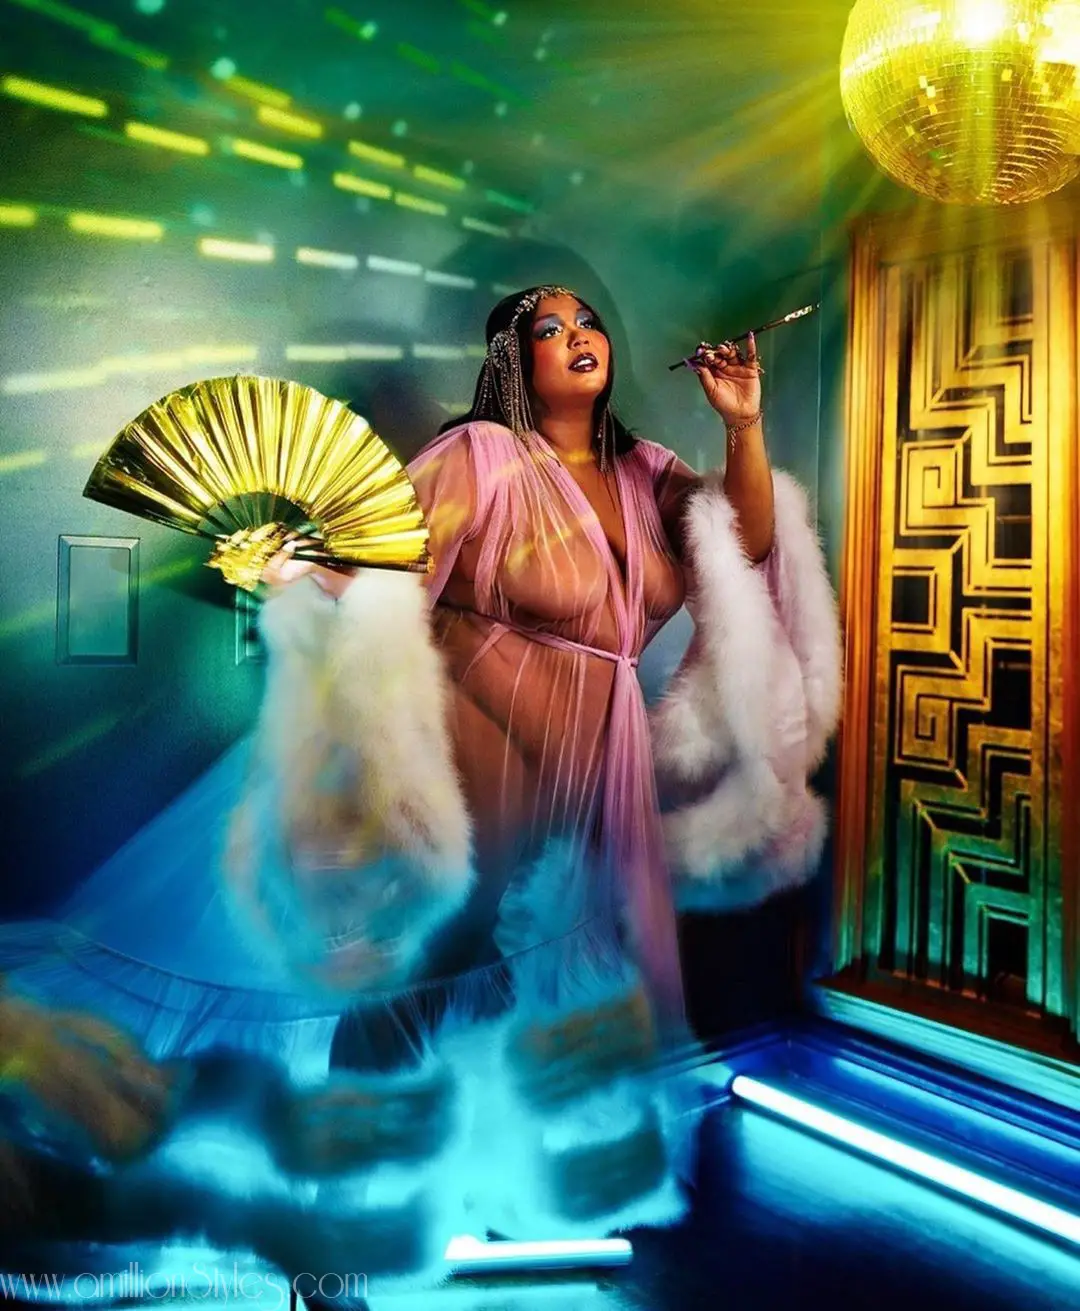 You Must See These Shots Of Lizzo In Rolling Stone.